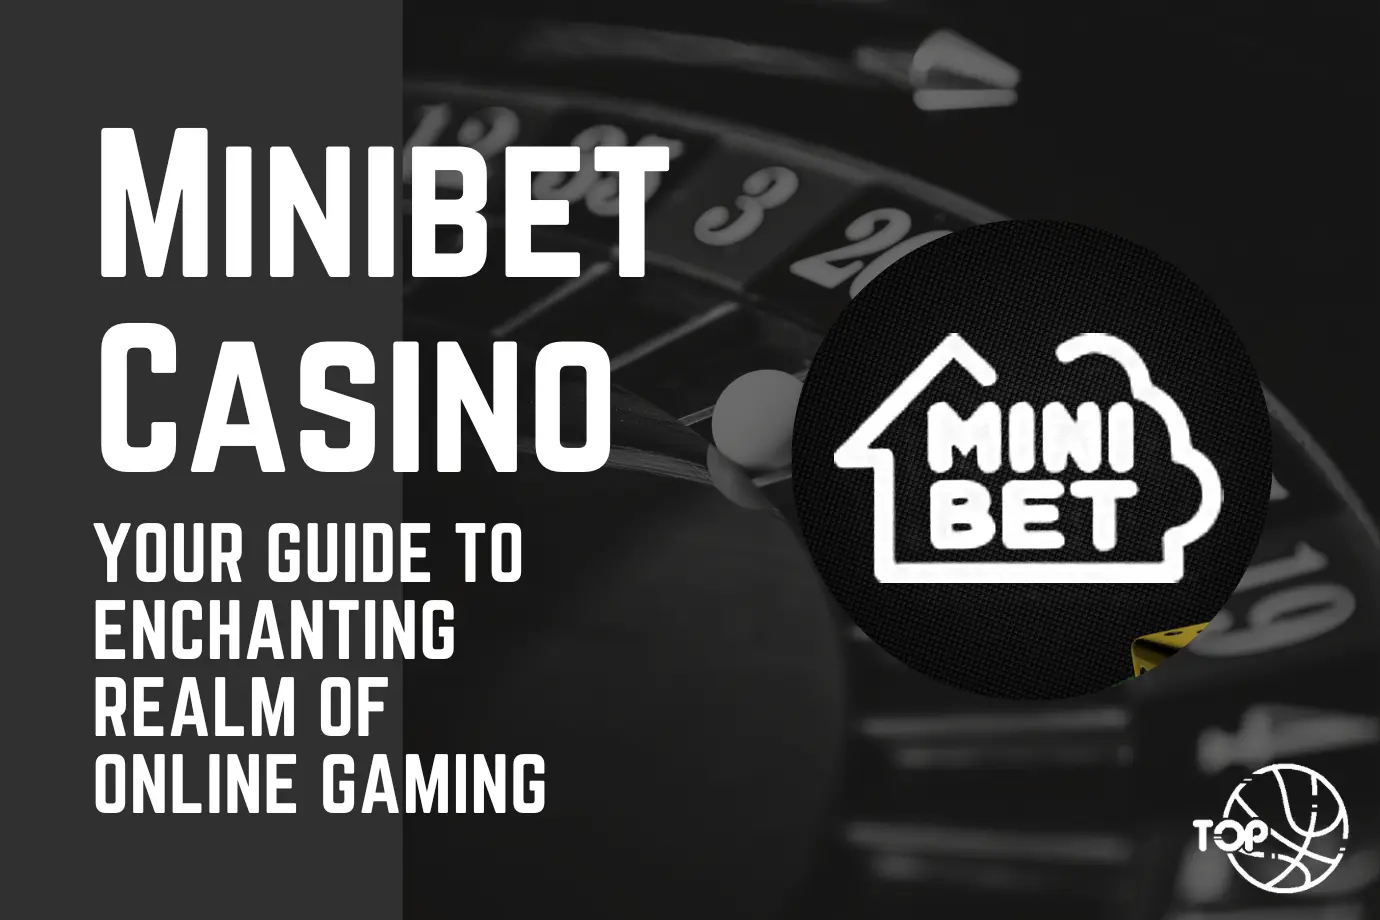 Minibet Casino: Your Guide to Enchanting Realm of Online Gaming